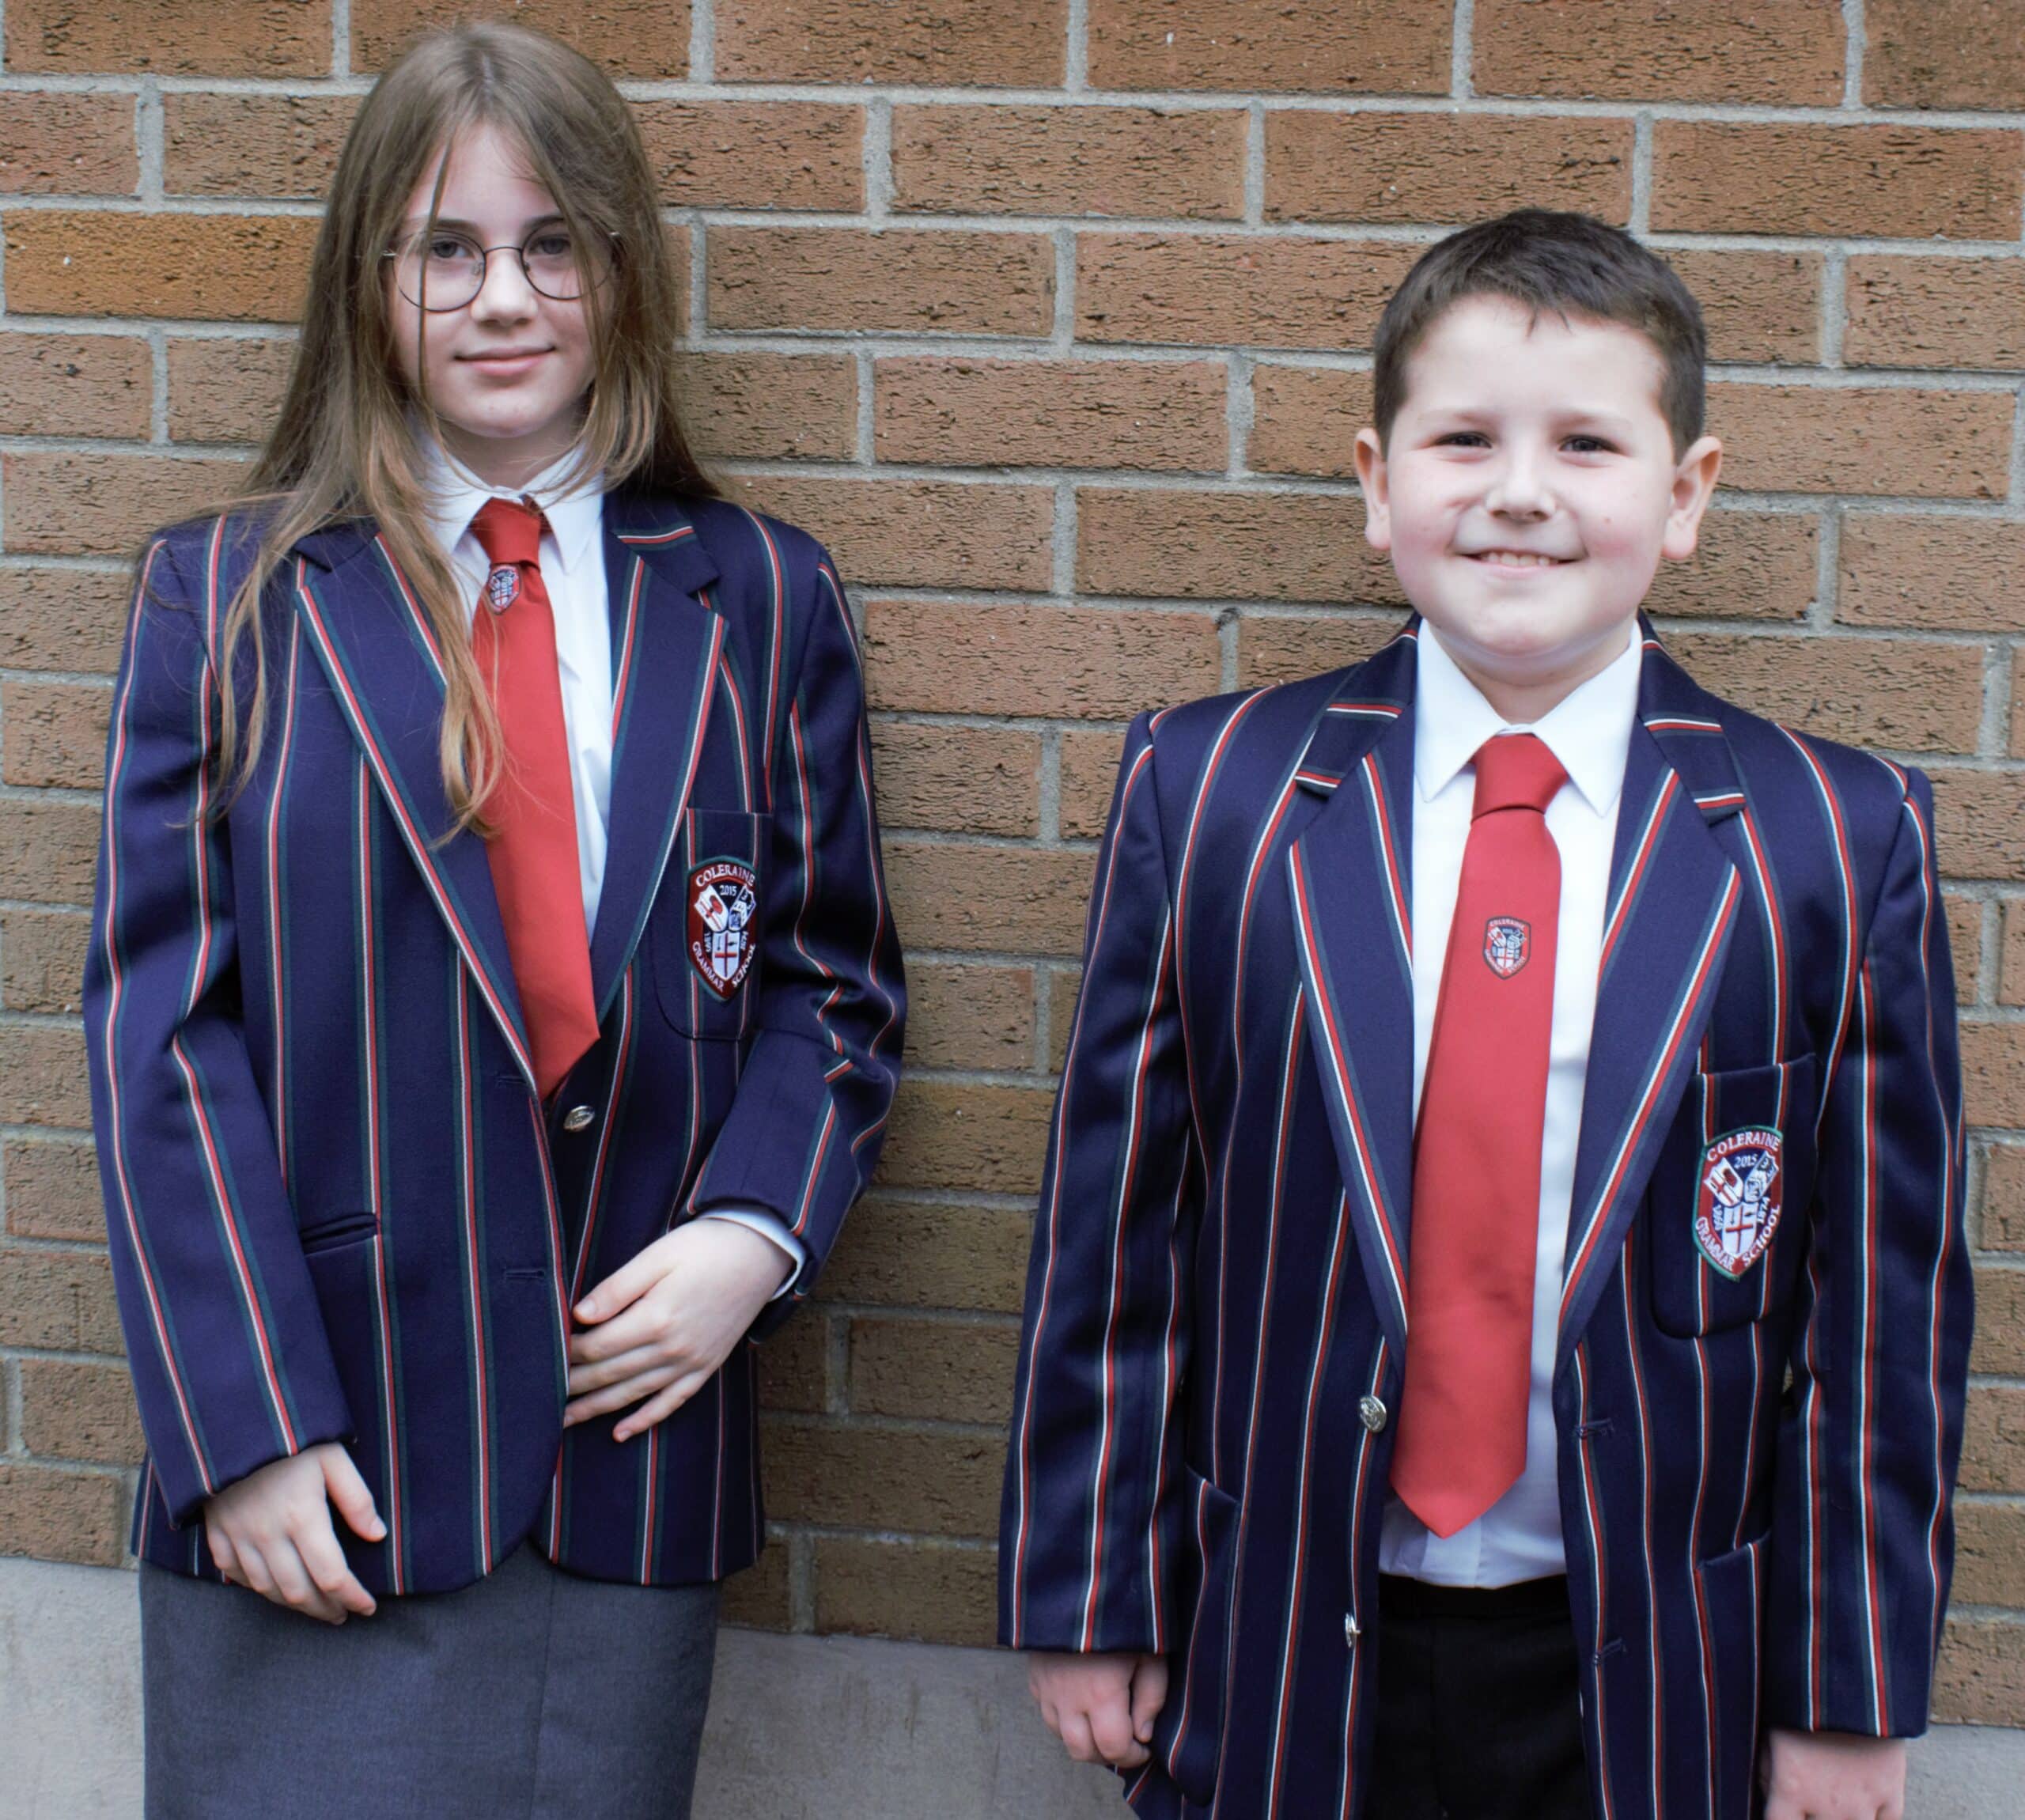 Welcome to our new Year 8 pupils – Coleraine Grammar School